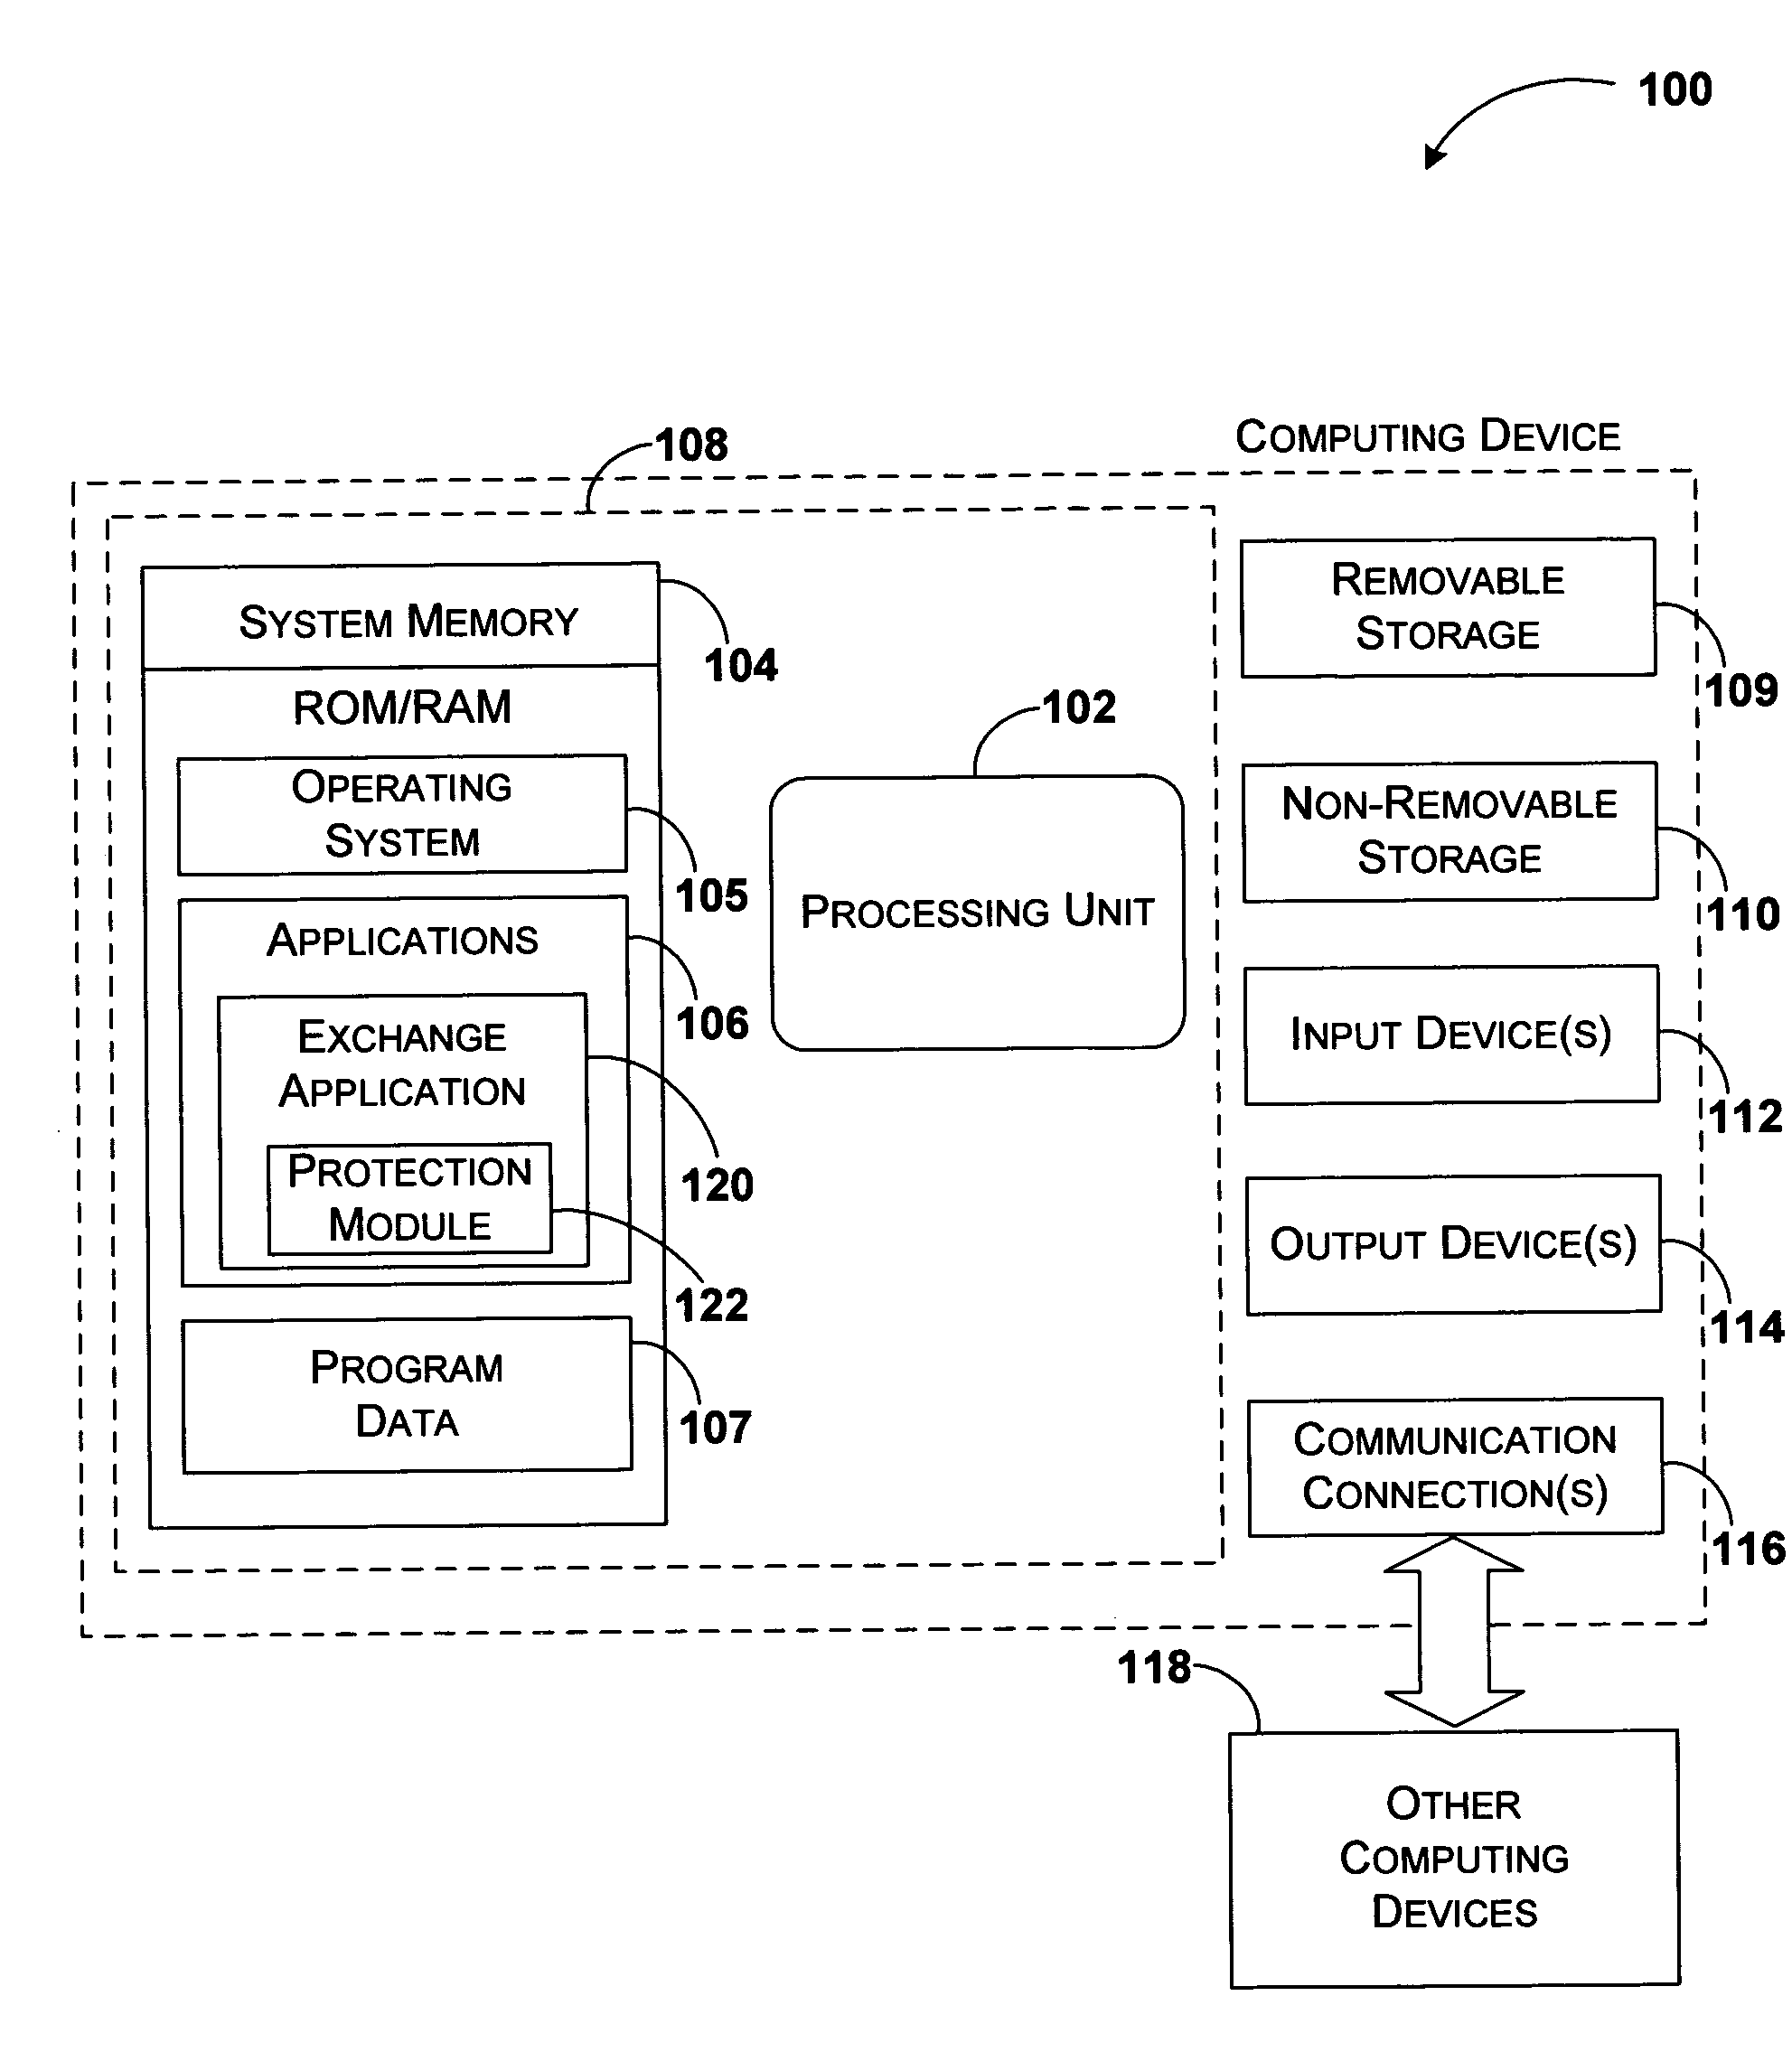 System and method for password protecting an attribute of content transmitted over a network